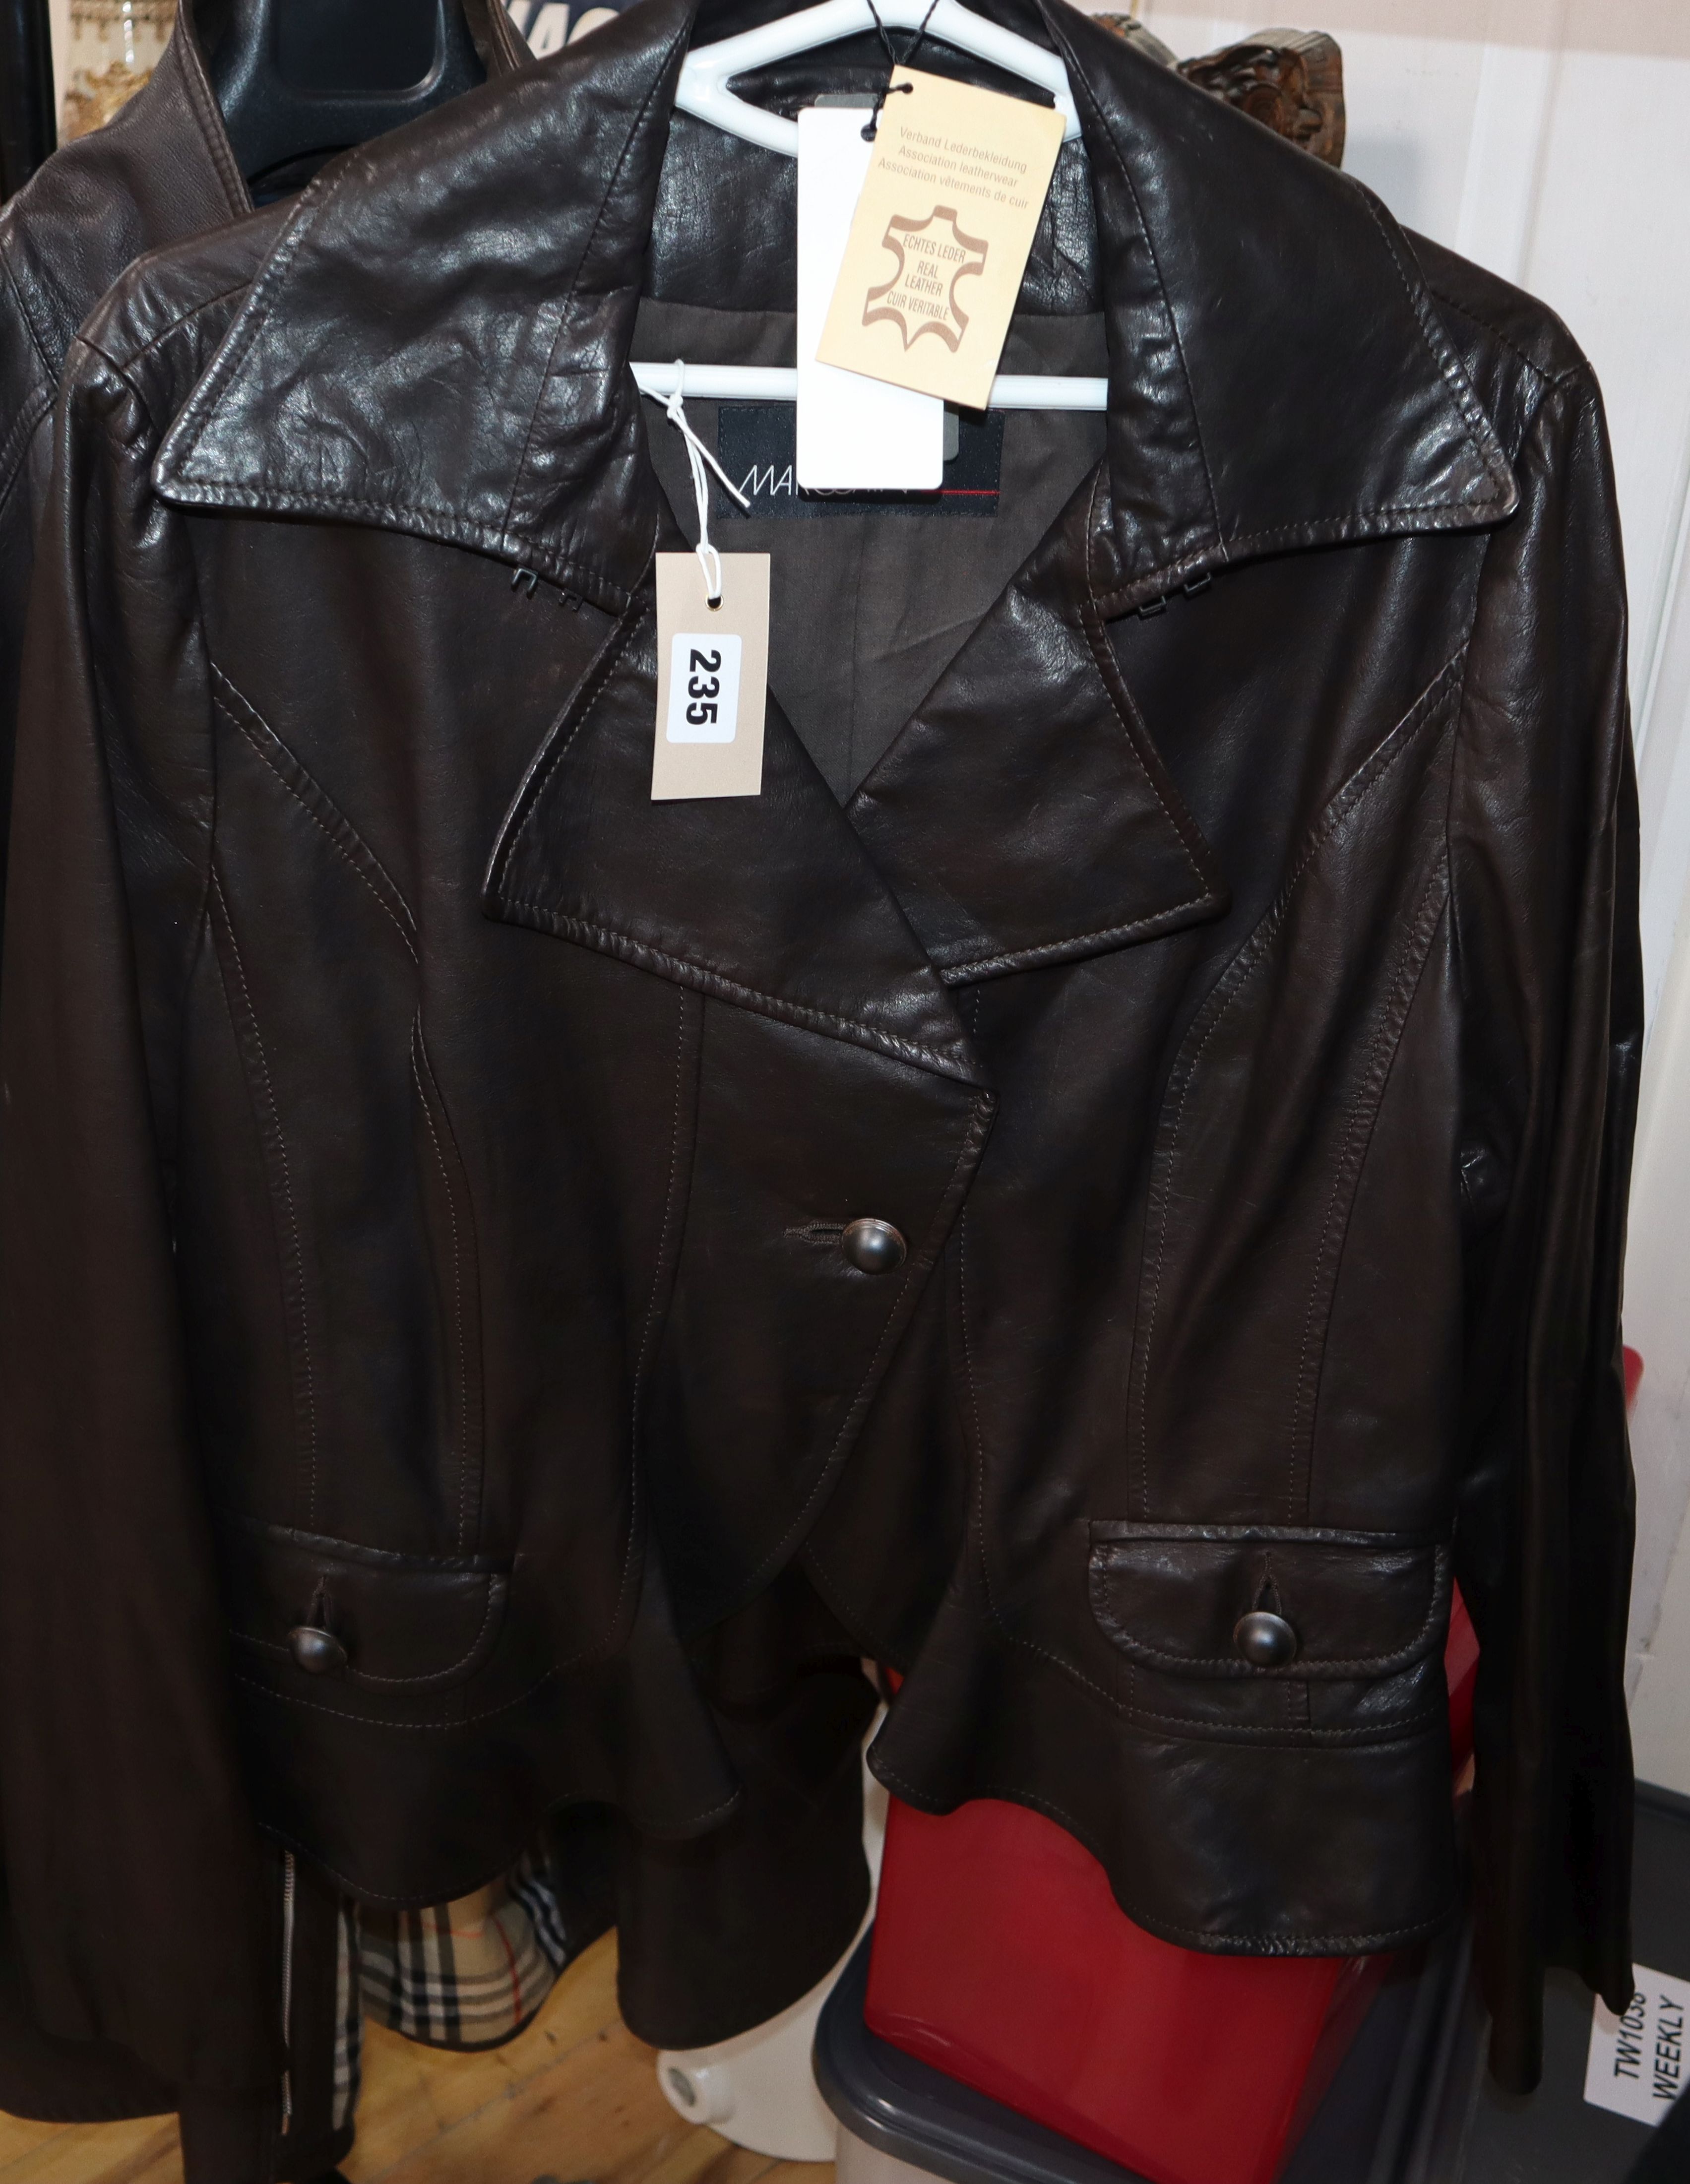 A Marc Cain leather jacket